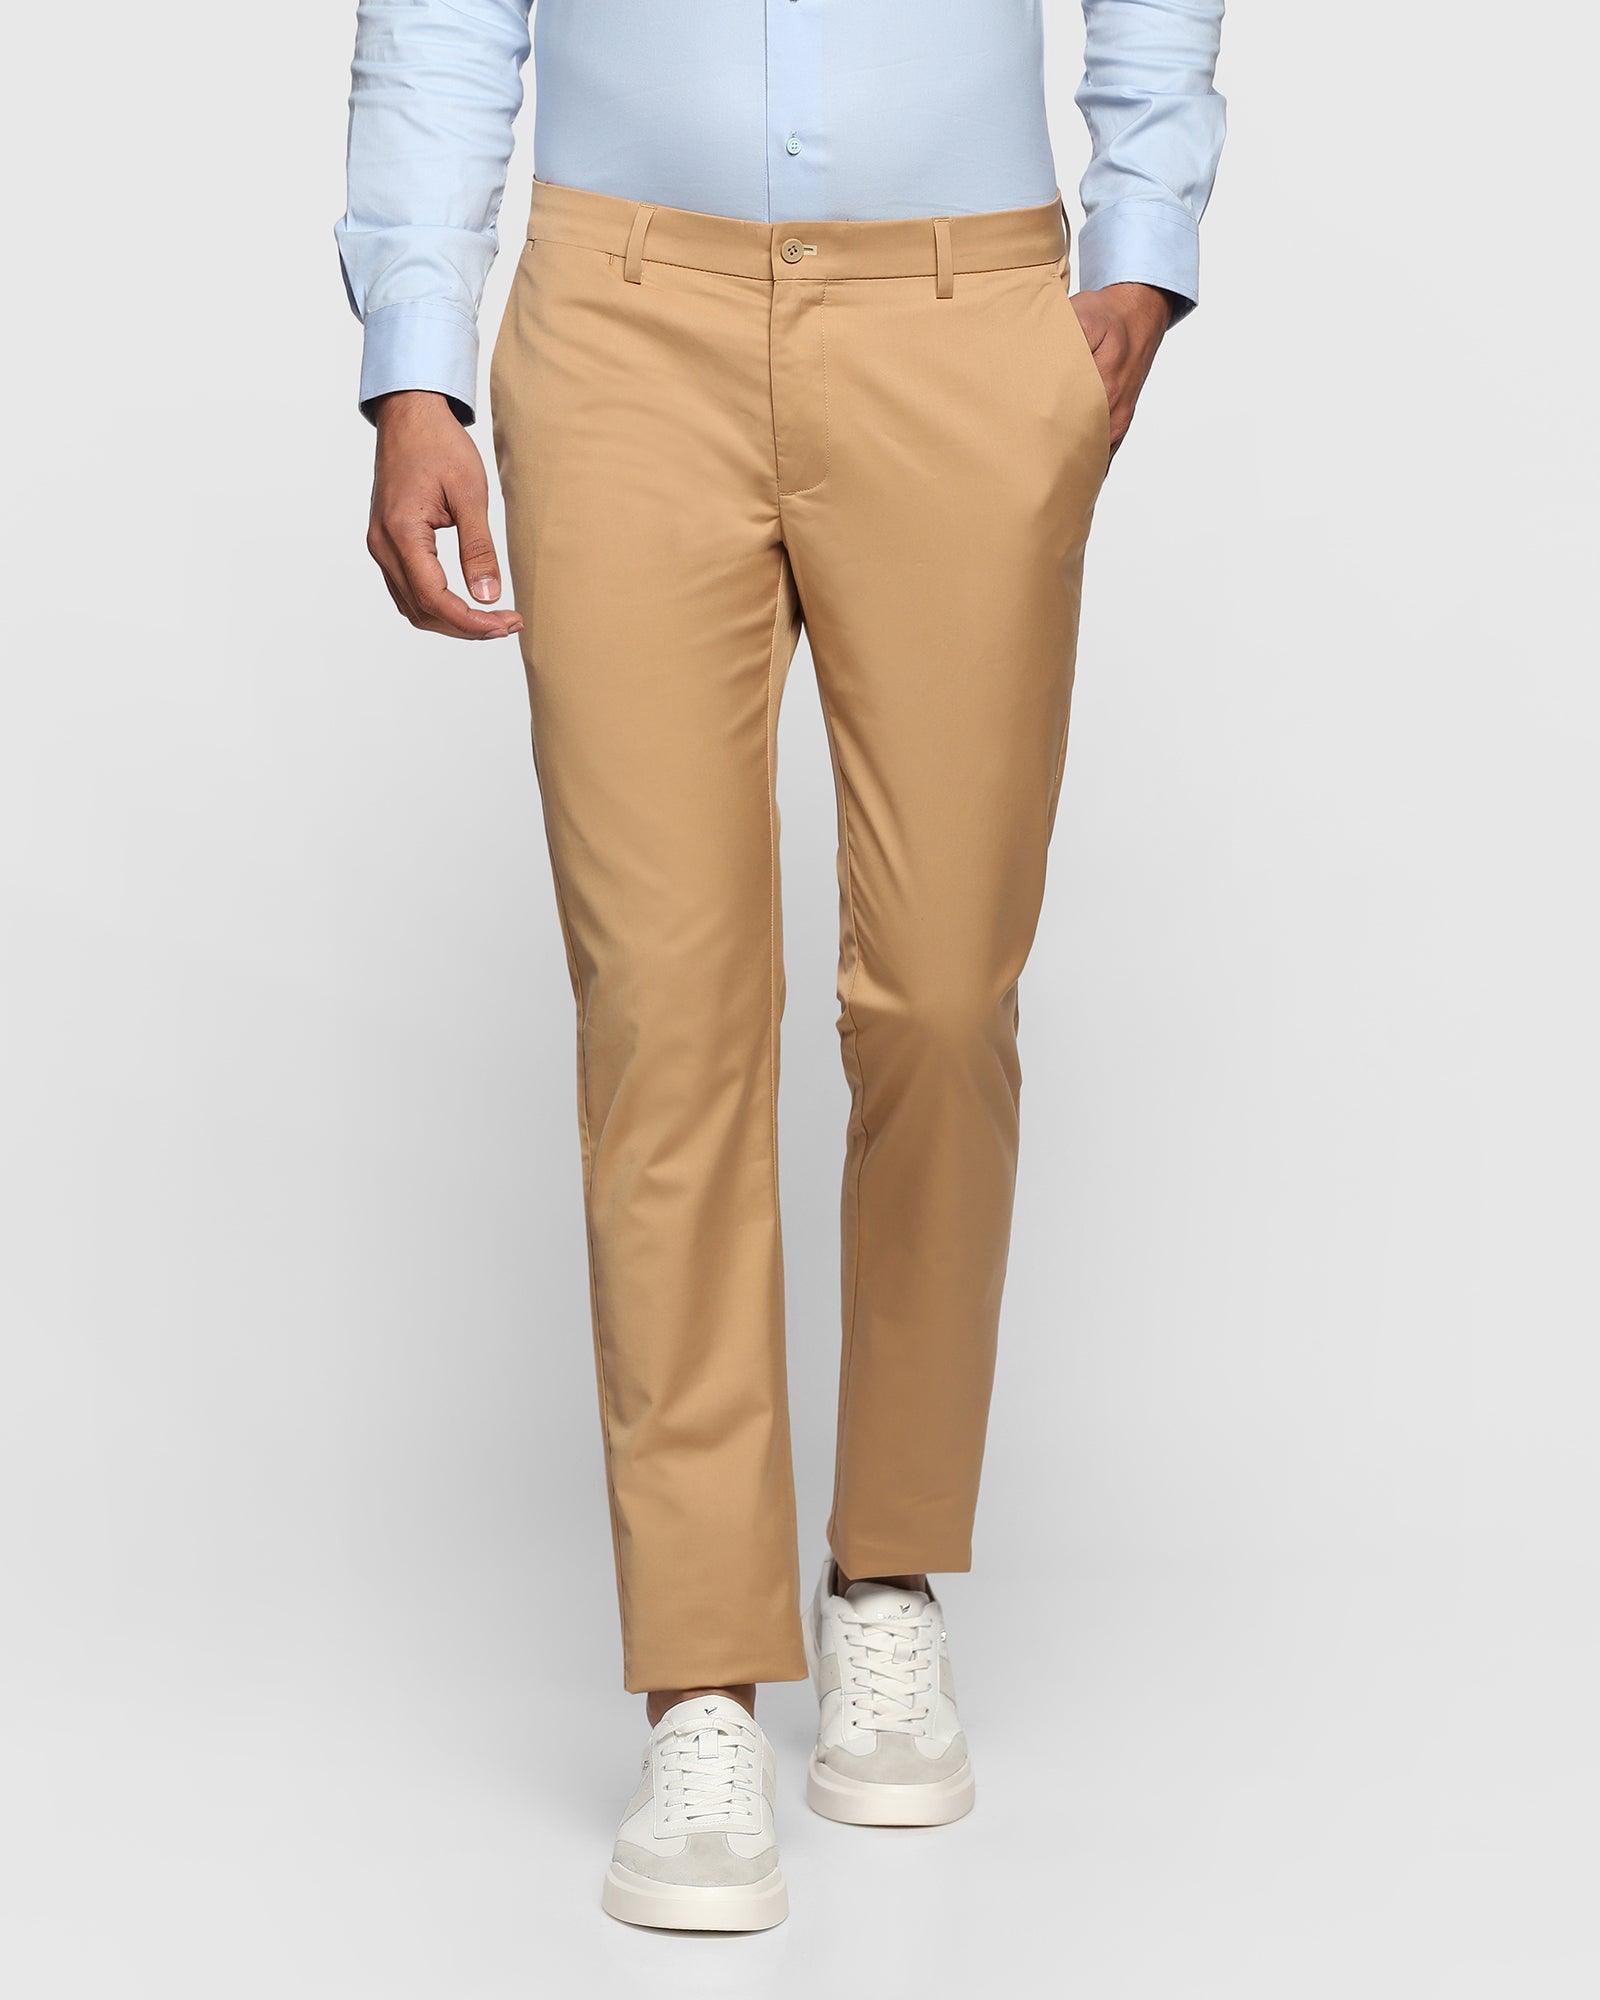 TechPro Slim Fit B-91 Casual Tan Solid Khakis - Nord